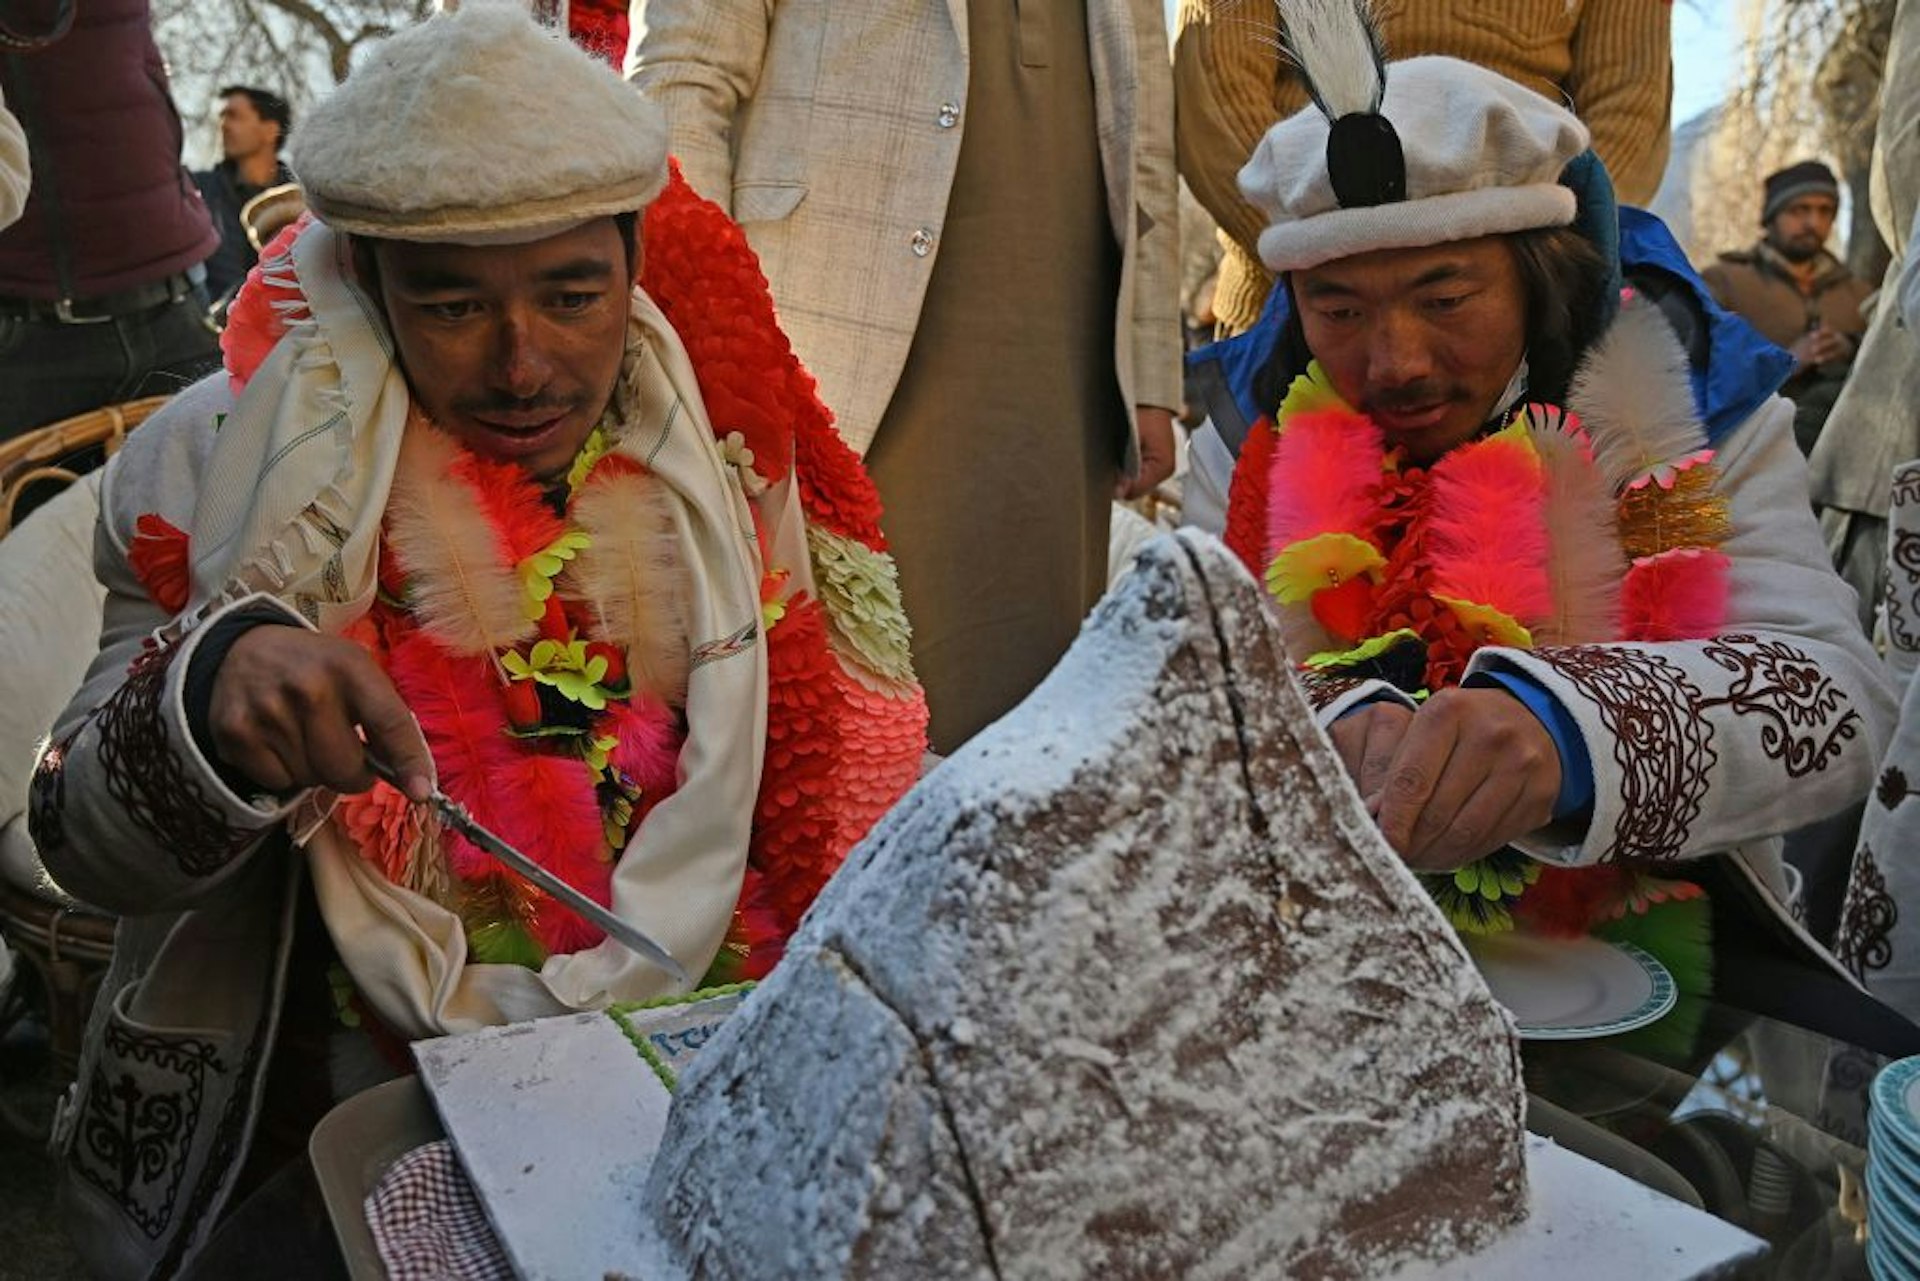 Nepal's climbers Nirmal Purja (L) and Mingma Sherpa (R) cut a cake upon their arrival after becoming the first to summit Pakistan's K2 in winter, during a ceremony at Shigar district in the Gilgit-Baltistan region of northern Pakistan 